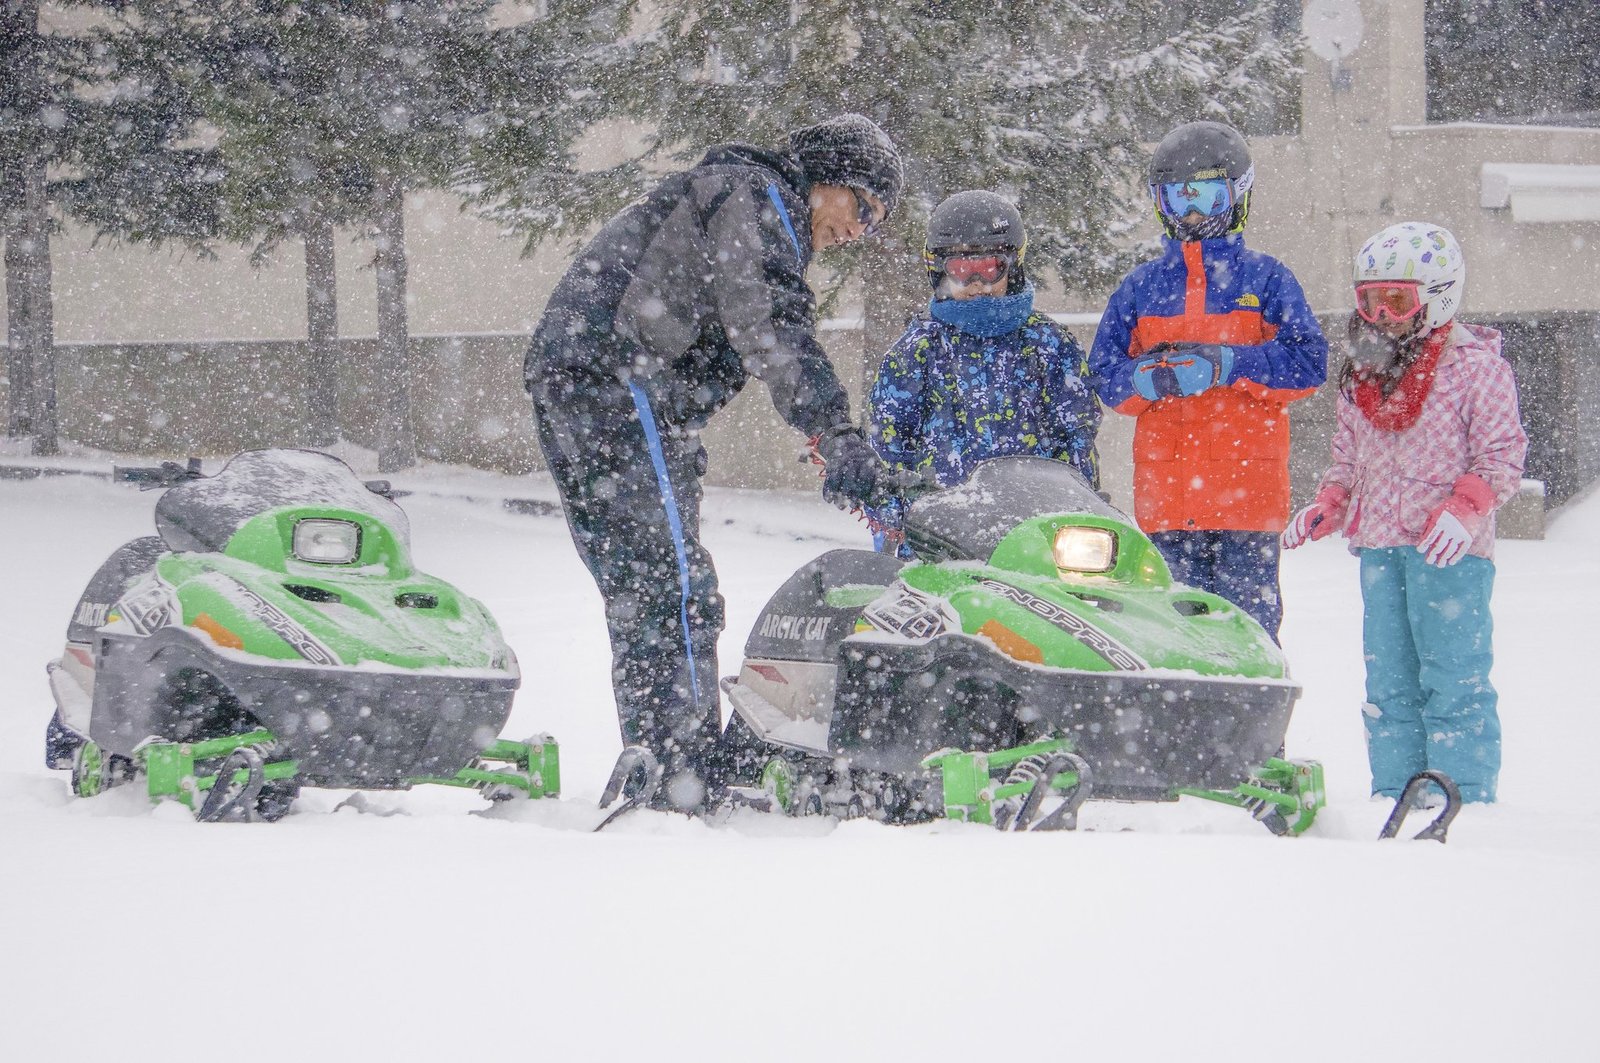 3 children learning how to drive a snowmobile safely